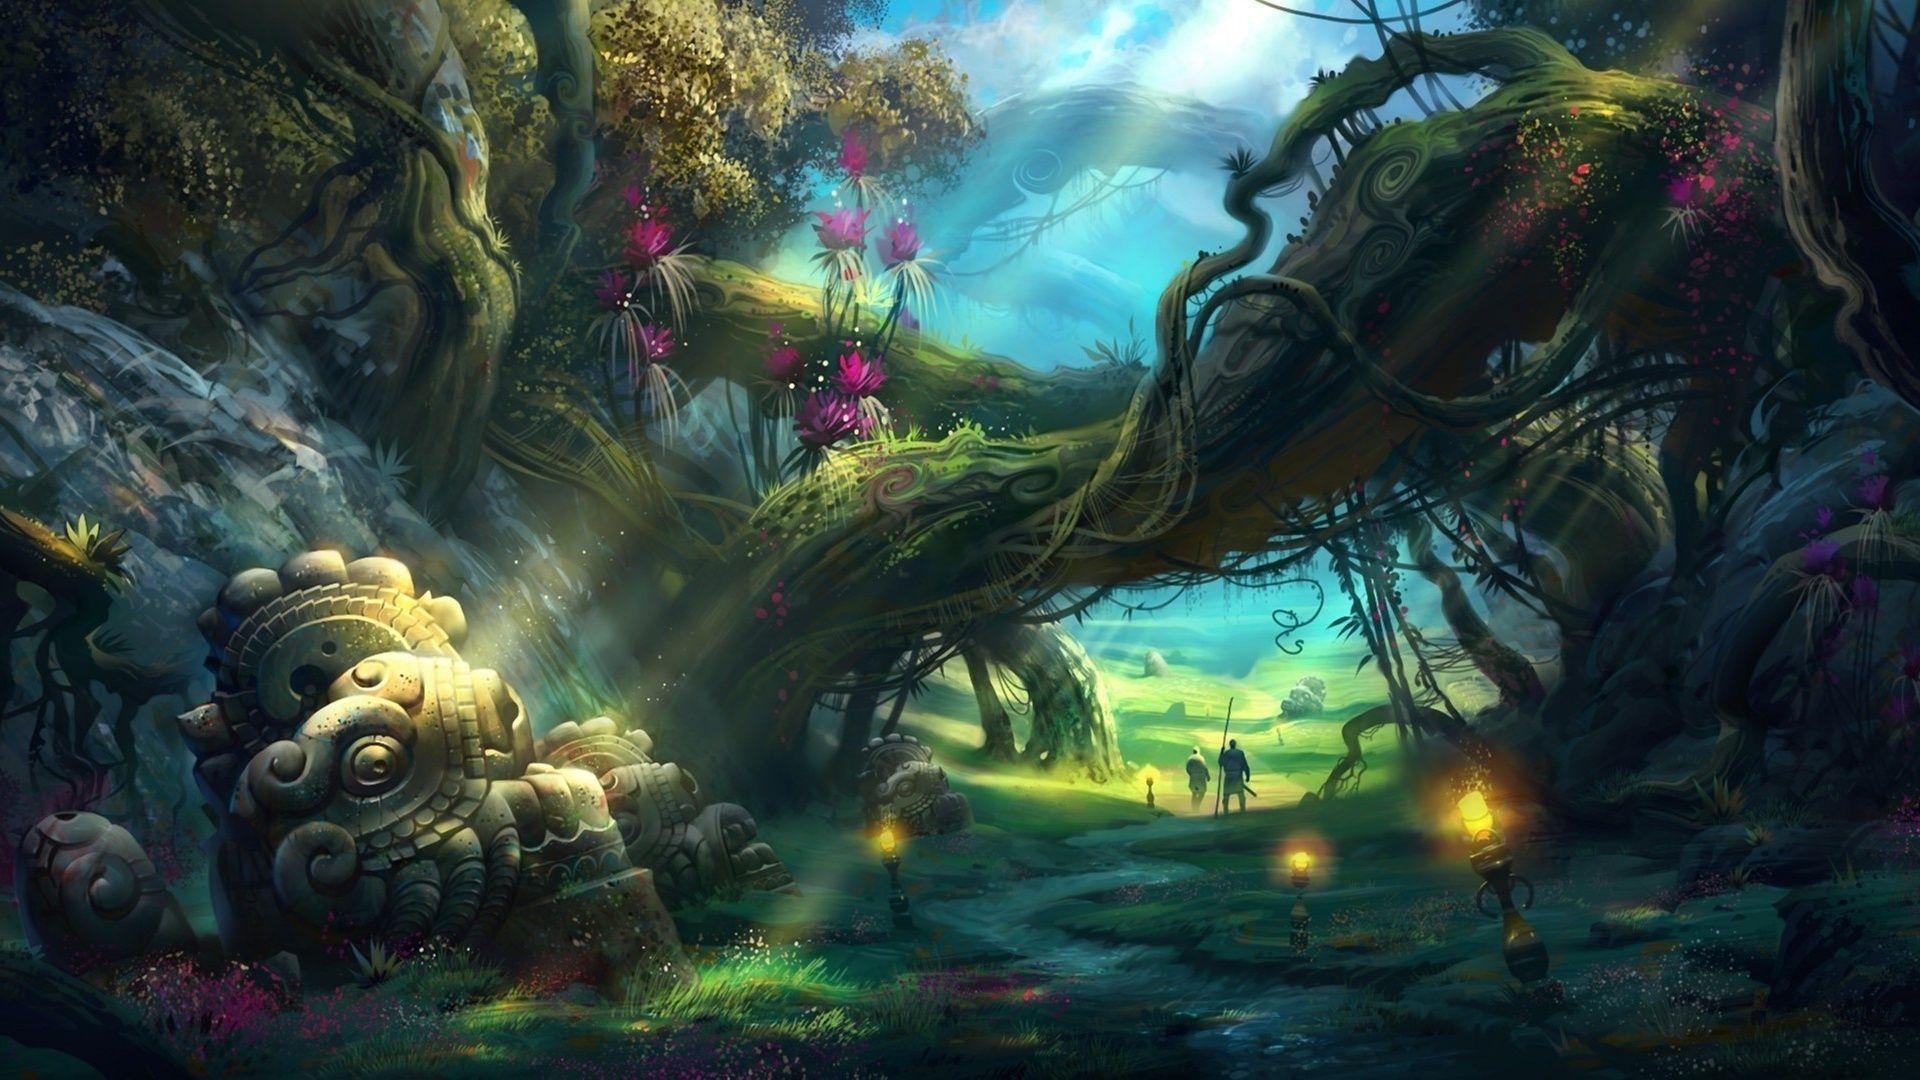 Cool Fantasy Forest 6 HD Image Wallpaper. HD Image Wallpaper